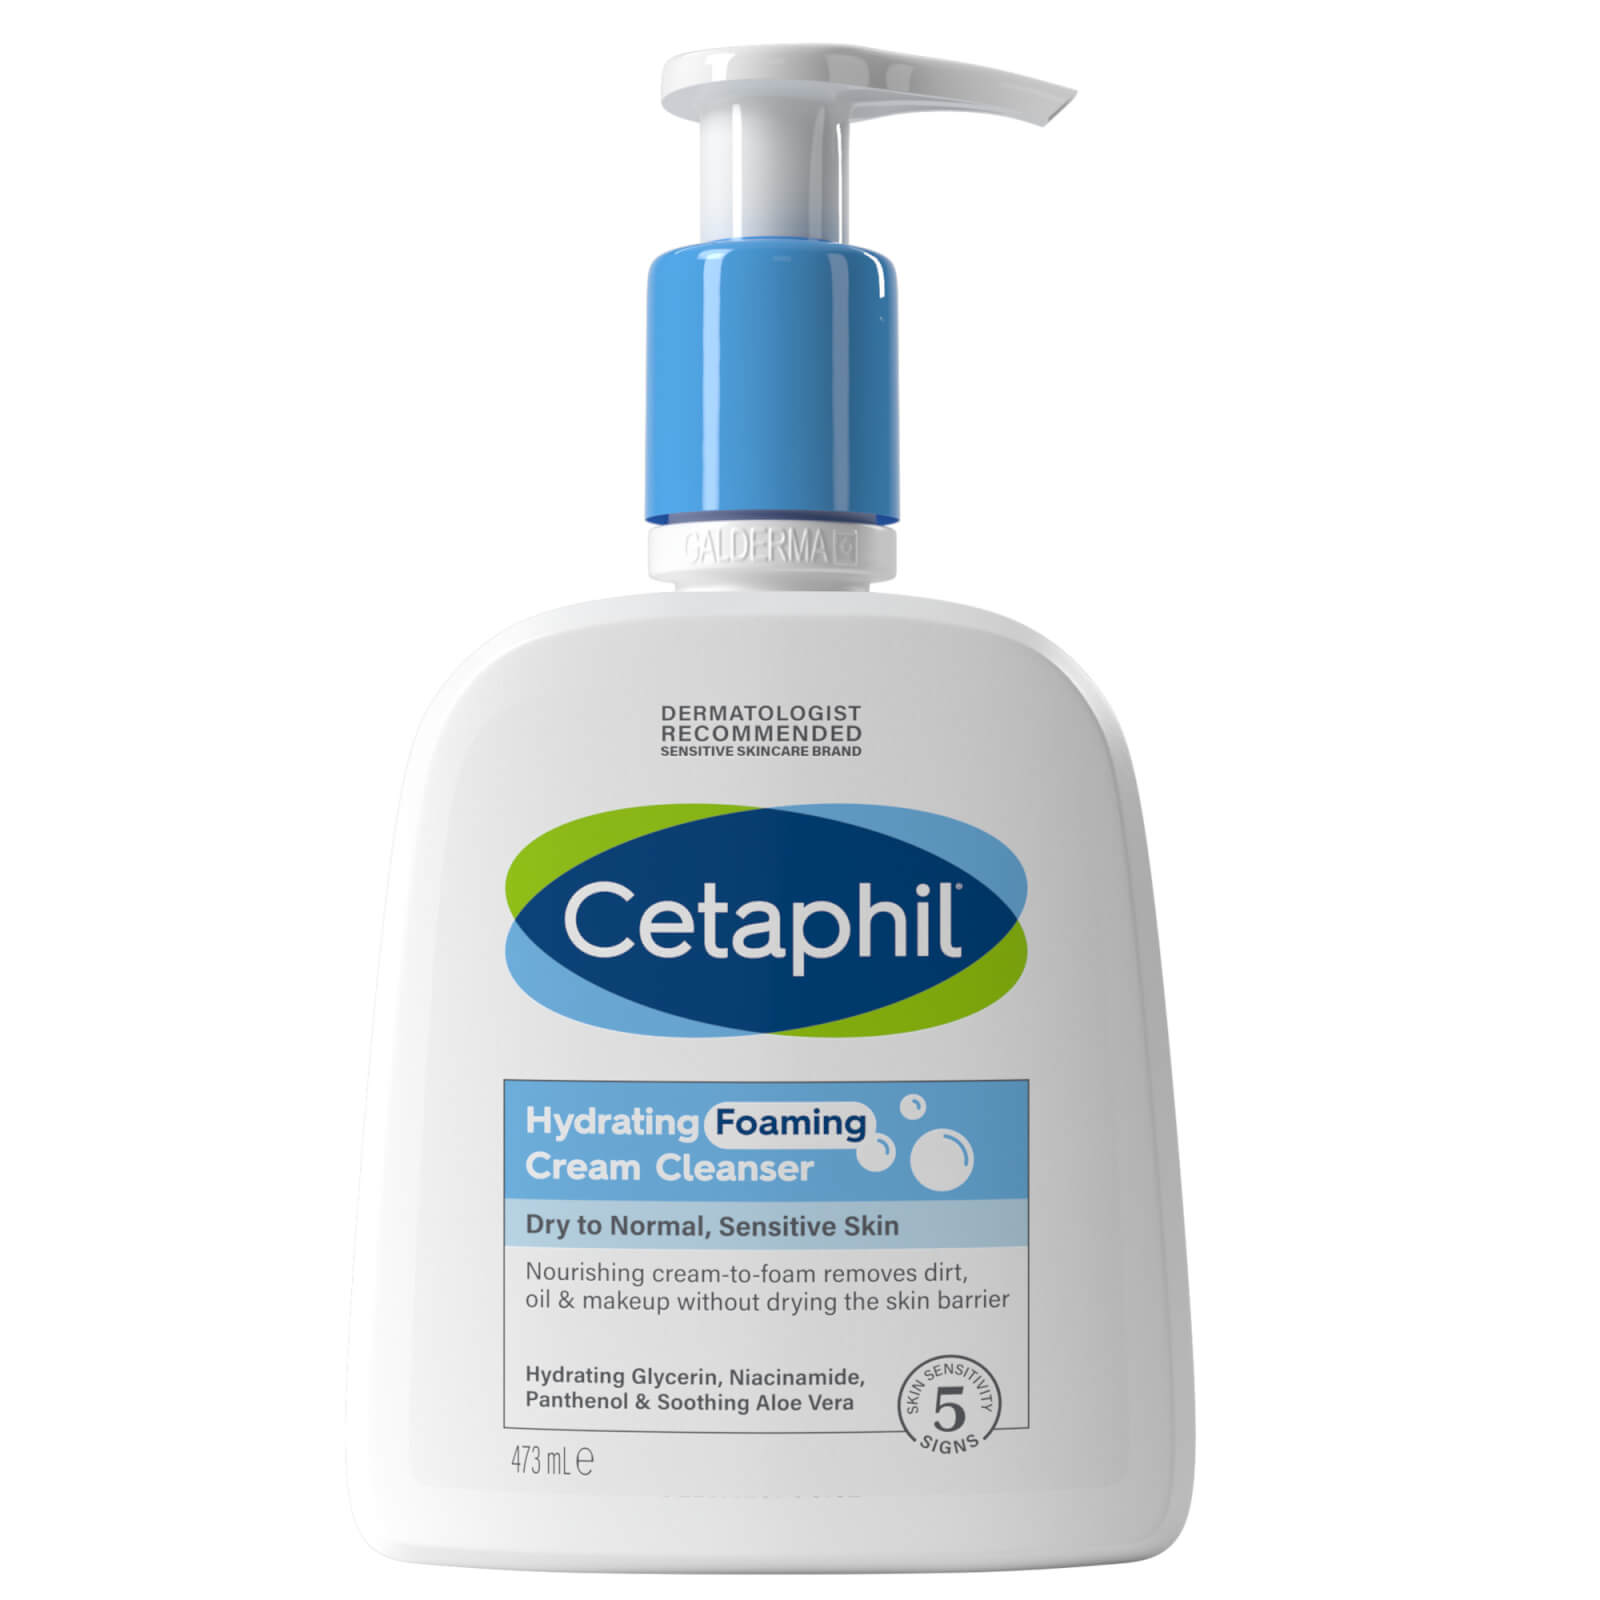 Image of Cetaphil Hydrating Foaming Cream Cleanser Wash 473ml